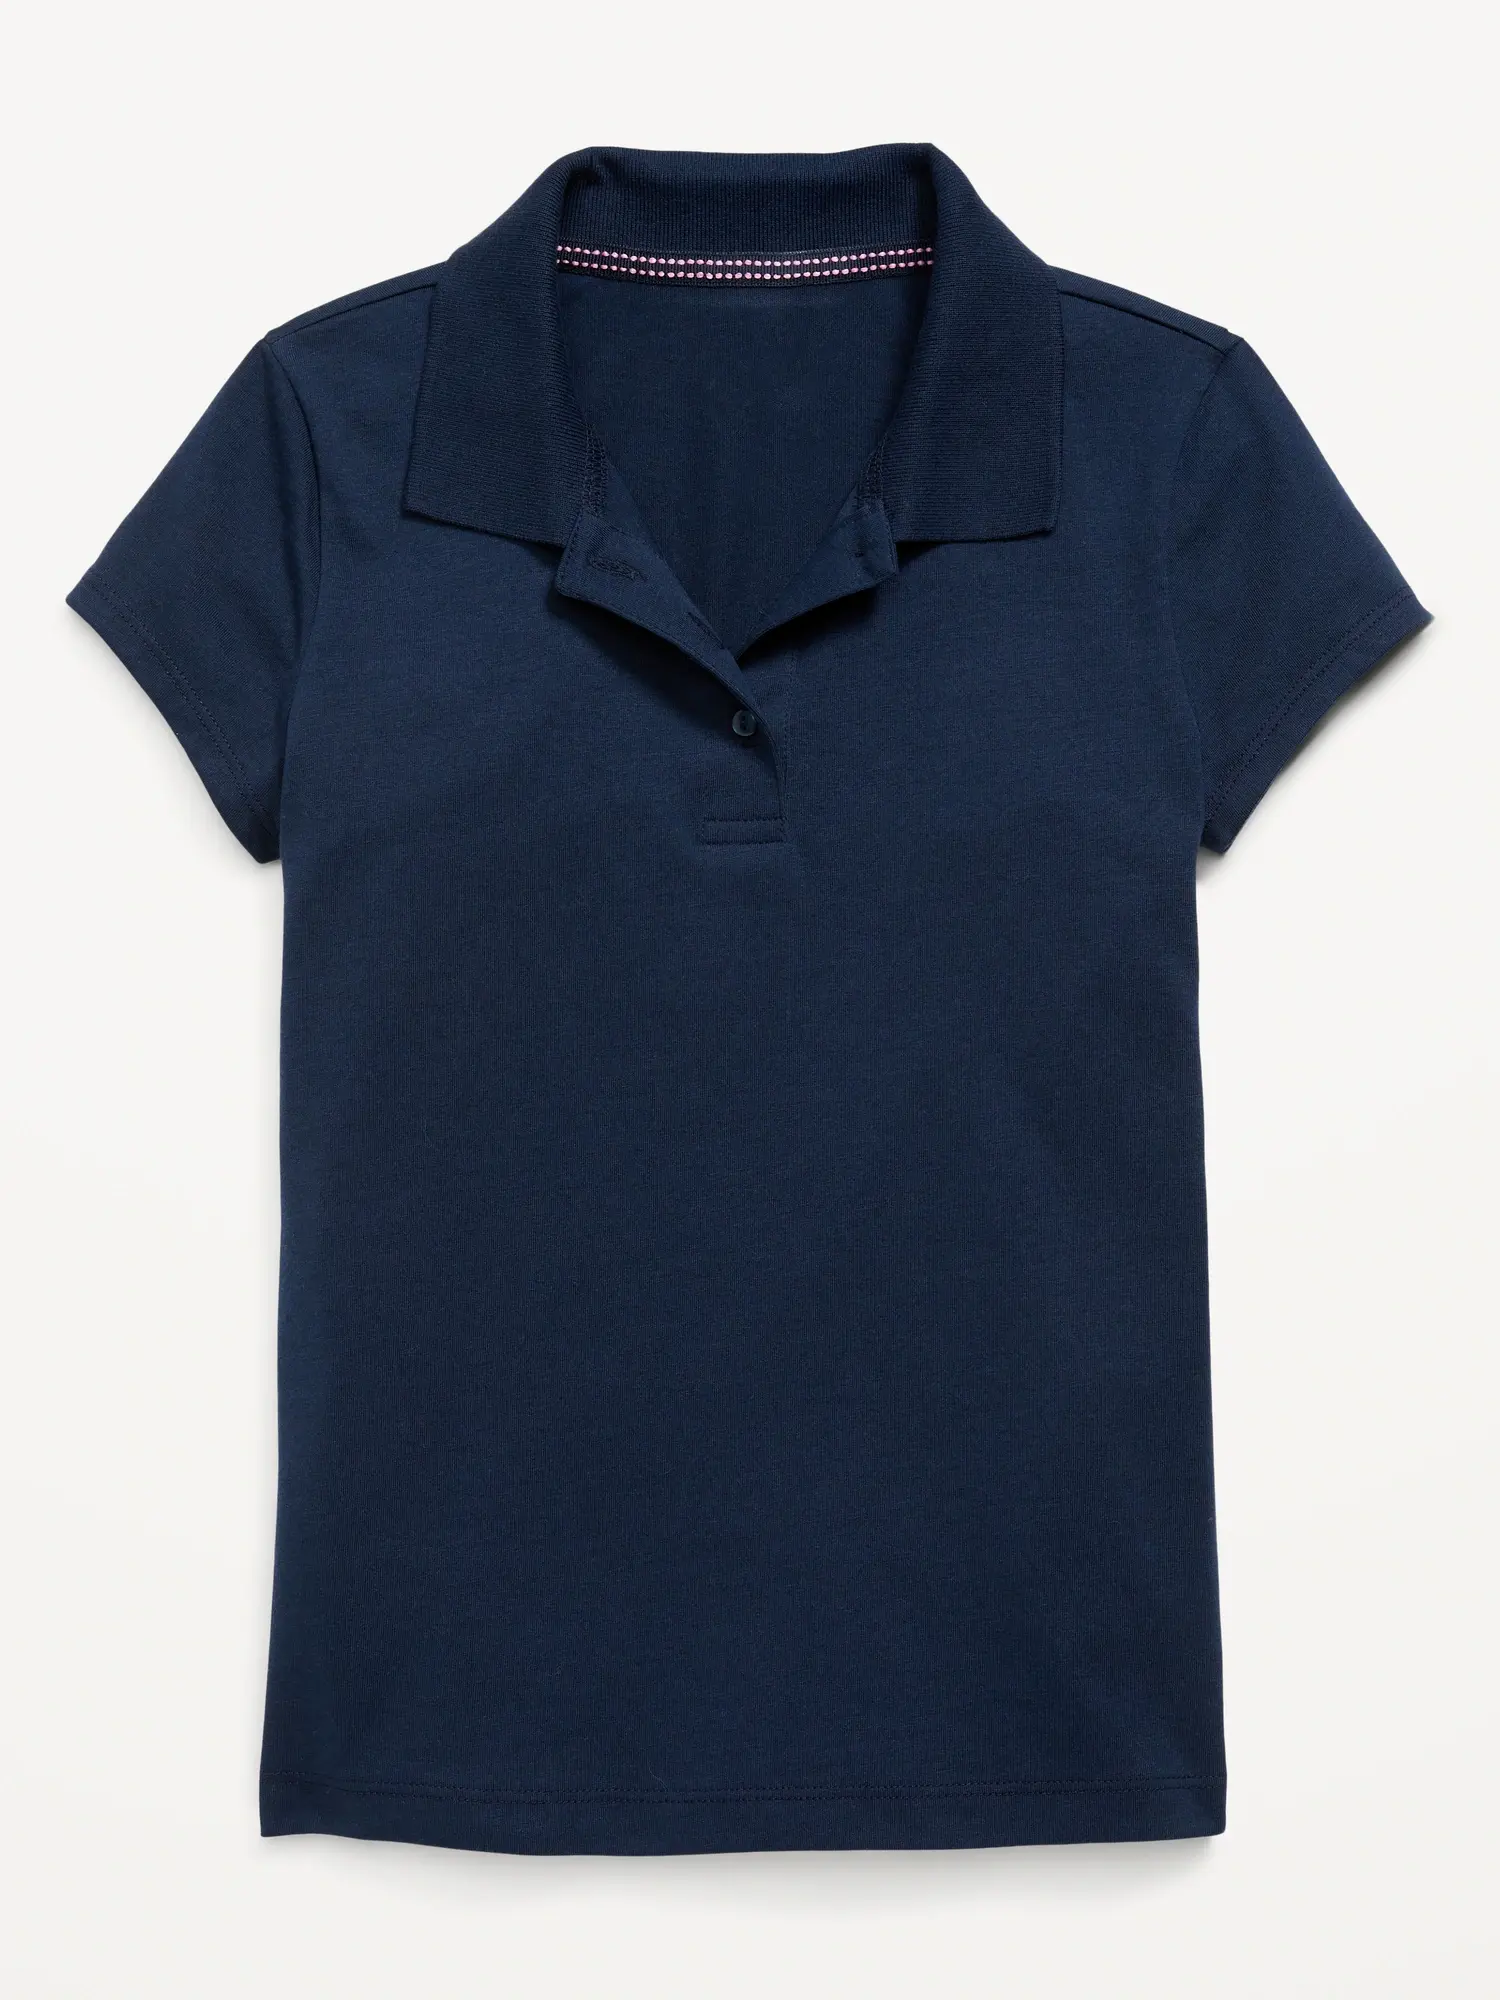 Old Navy Uniform Jersey Polo Shirt for Girls blue. 1